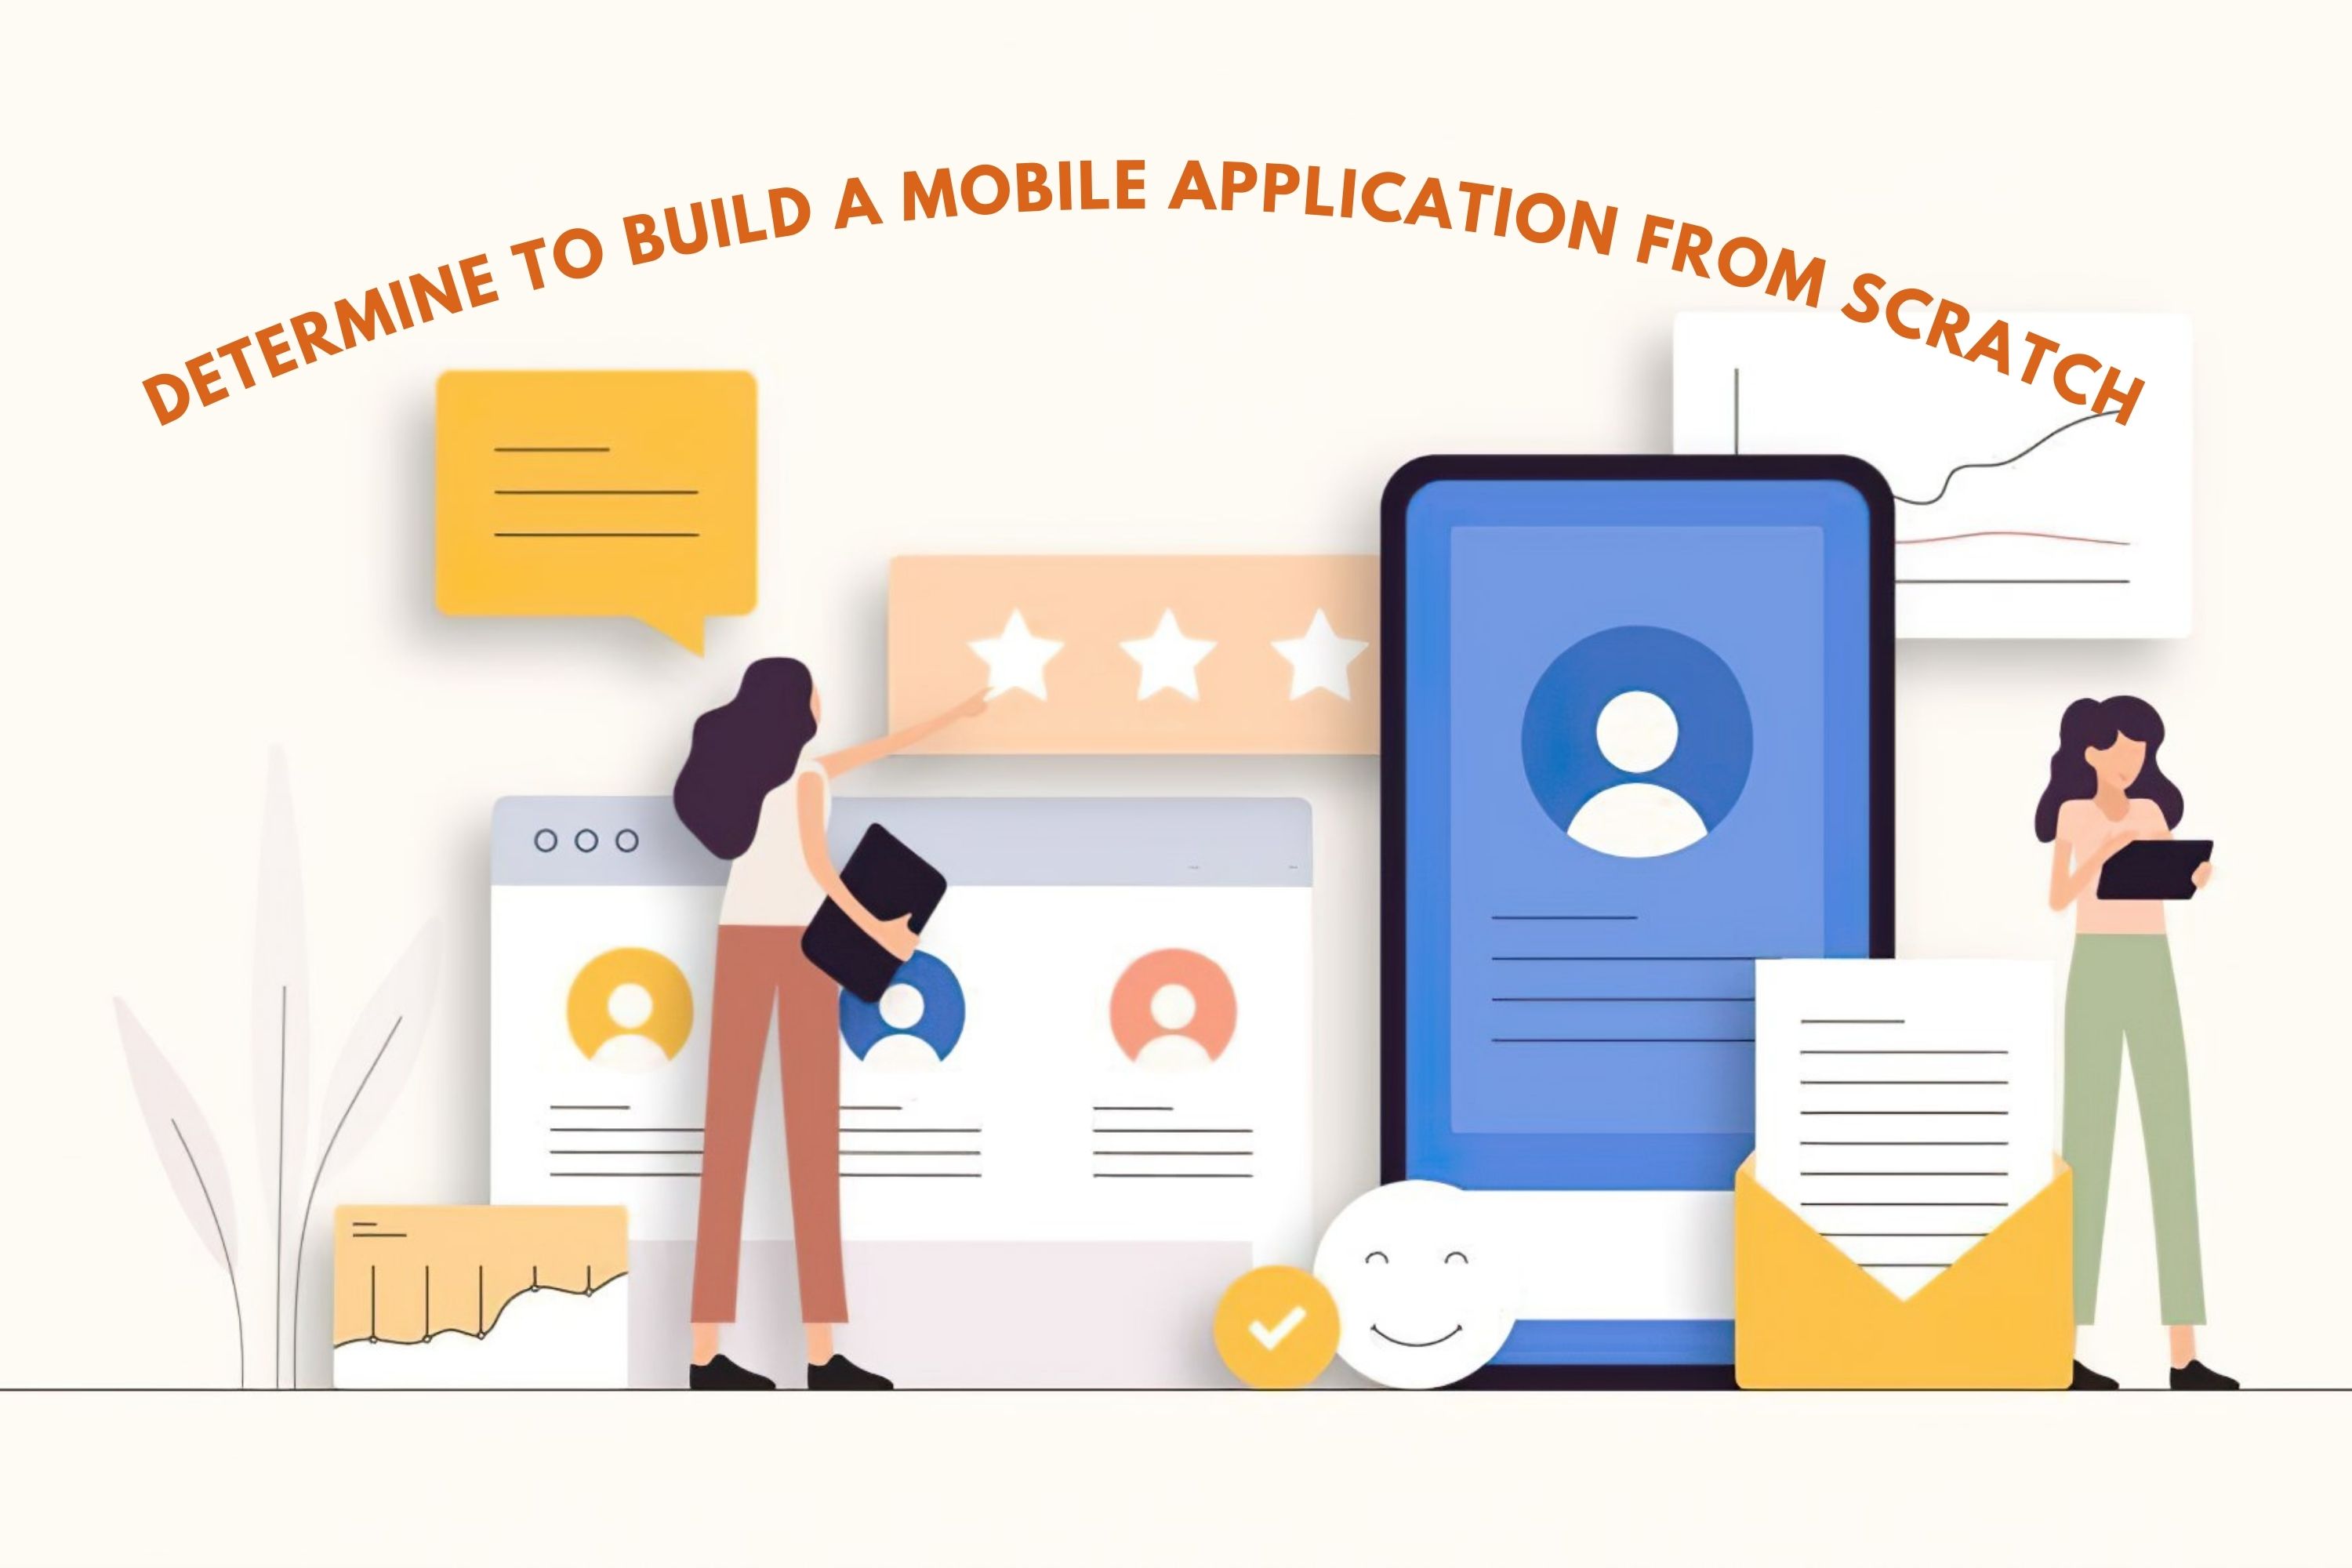 Determine to Build a Mobile Application From Scratch